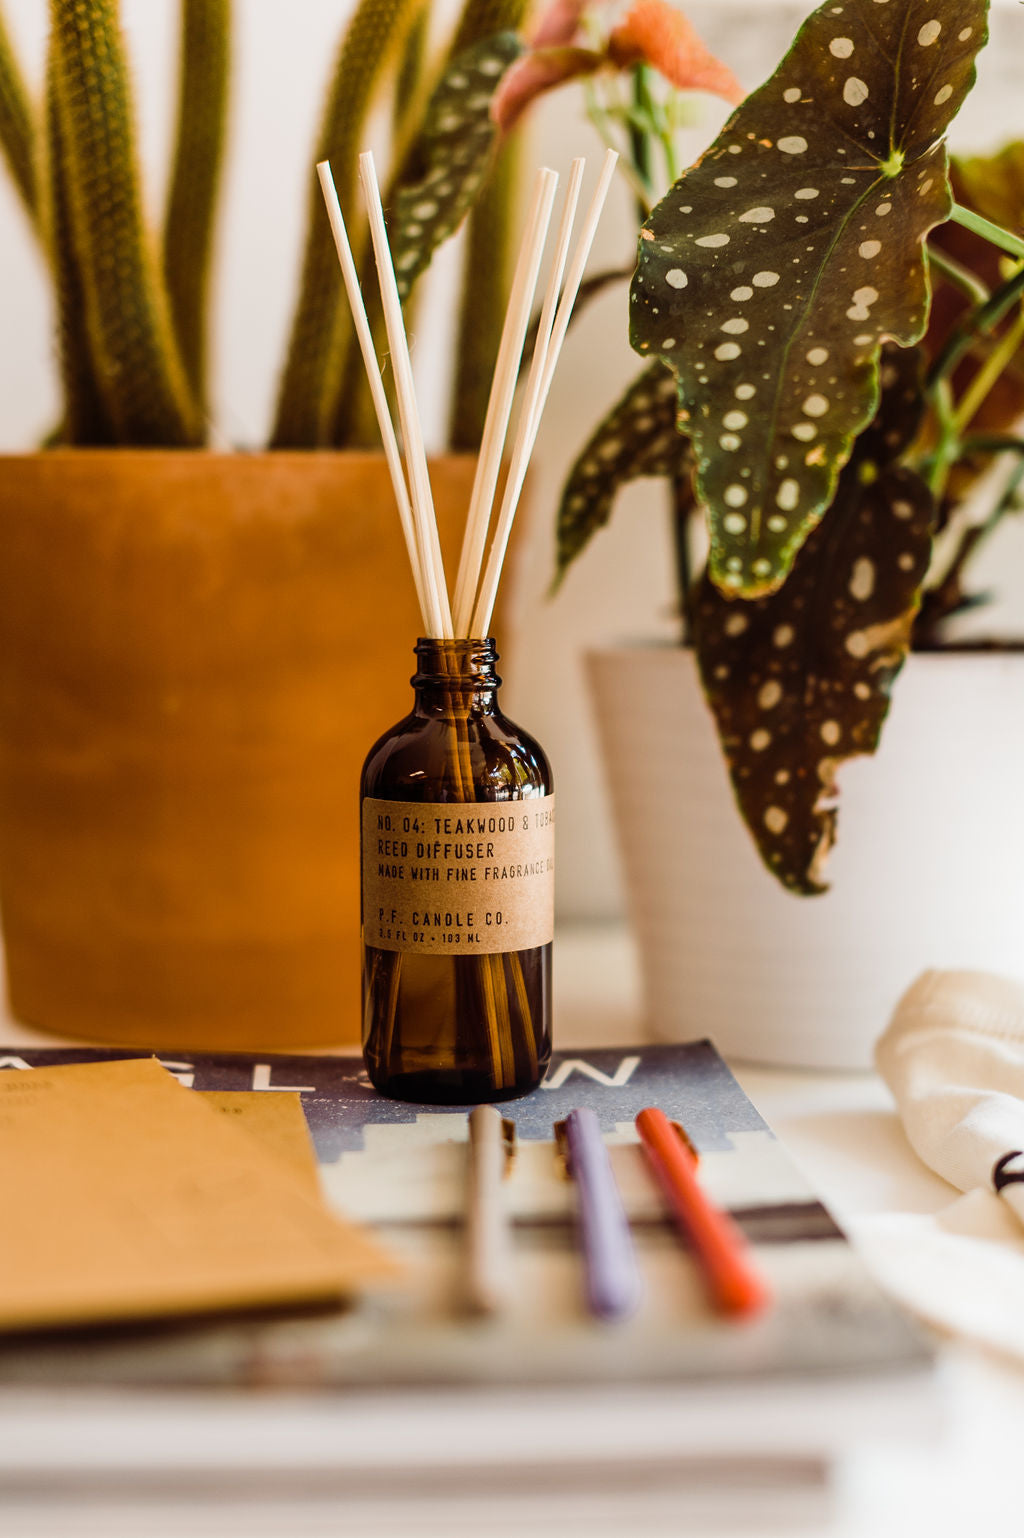 3.5 fl oz glass bottle reed diffuser that includes rattan reeds and made with naturally-derived and man-made fragrance oils | scent is a  blend of leather, teak, and orange | made by PF Candle Co. || you can shop now at shop.rambleandcompany.com or visit our storefront in downtown Wichita Falls, Texas || small batch + hand printed tees | home goods | paper goods | gifts + more